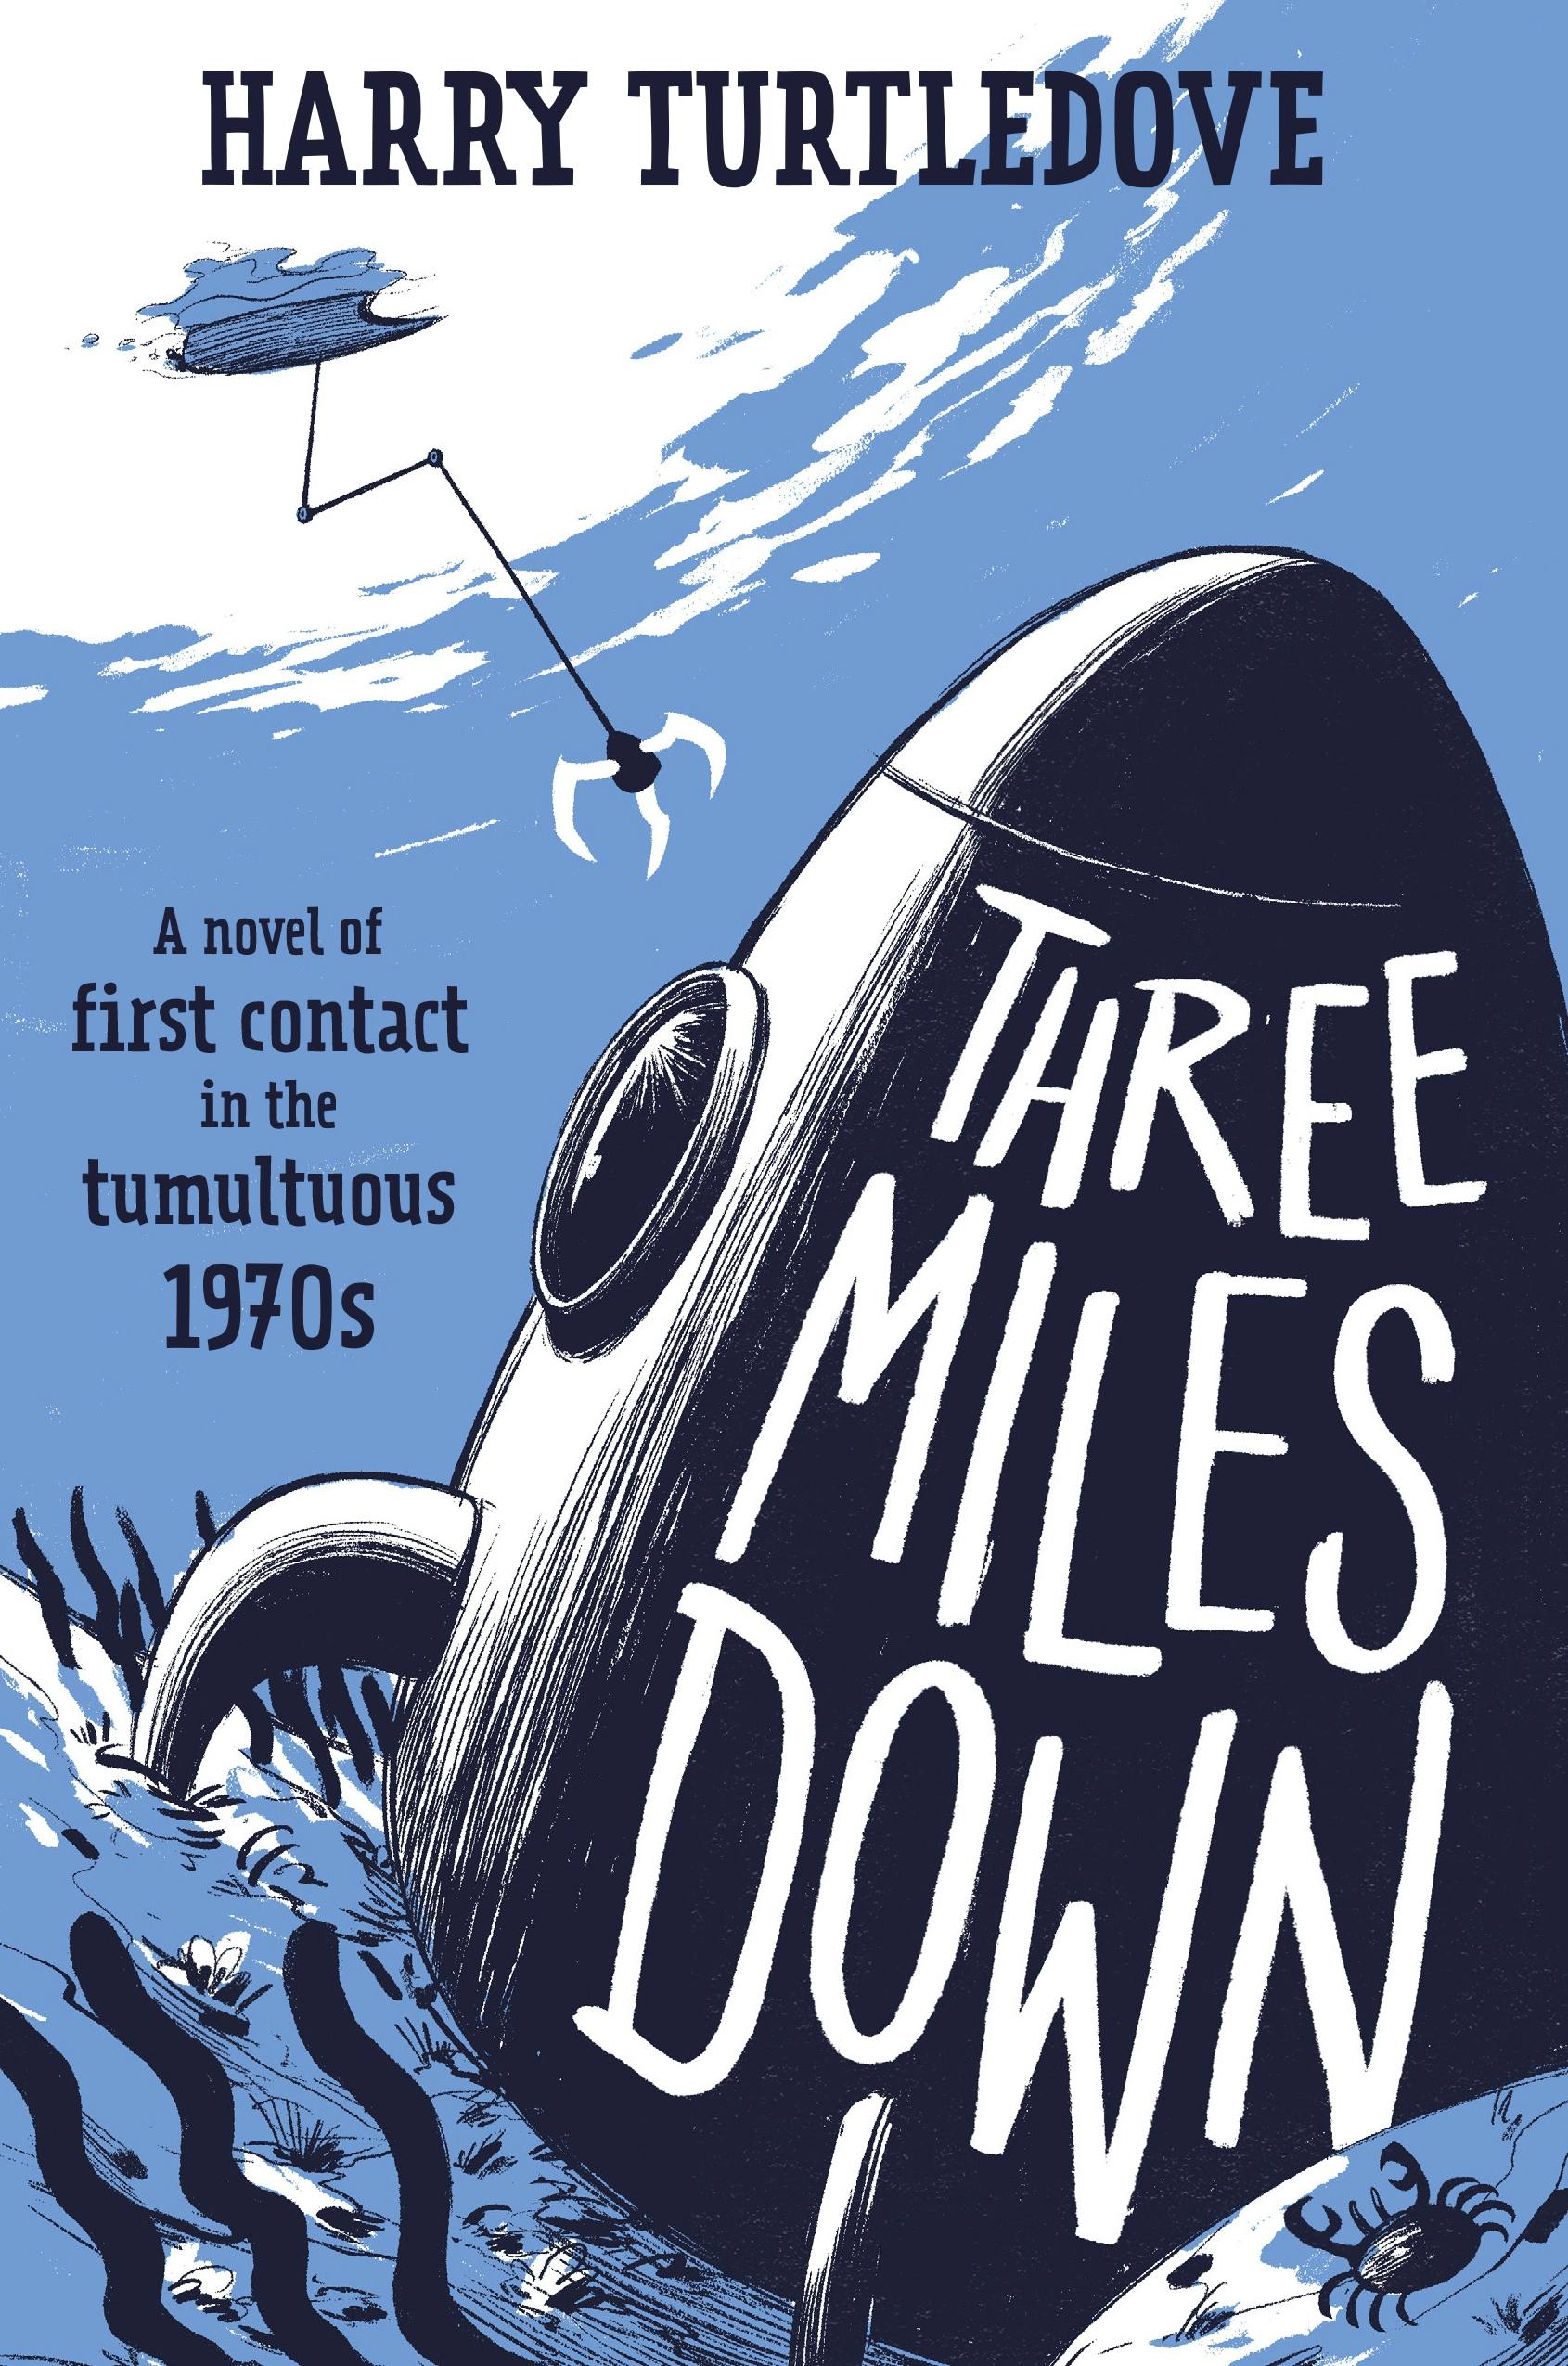 Cover for the book titled as: Three Miles Down